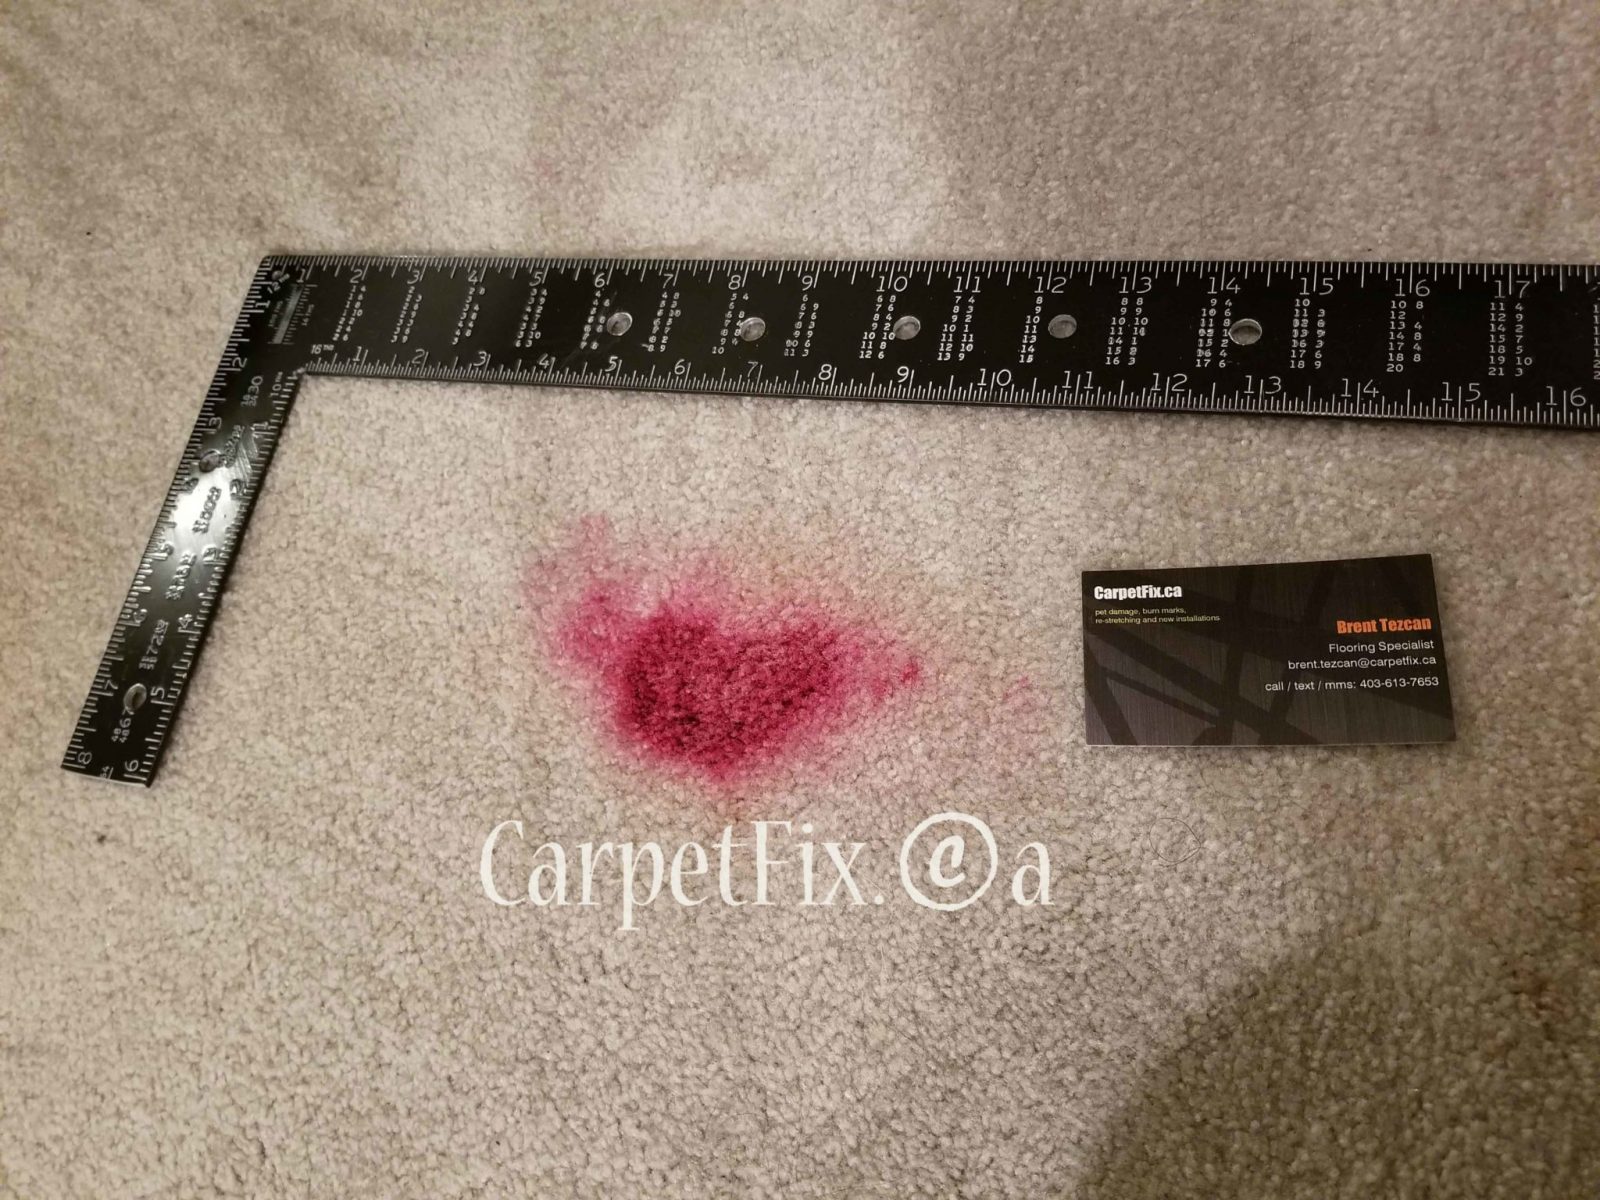 How to remove nail polish mark from the carpet?